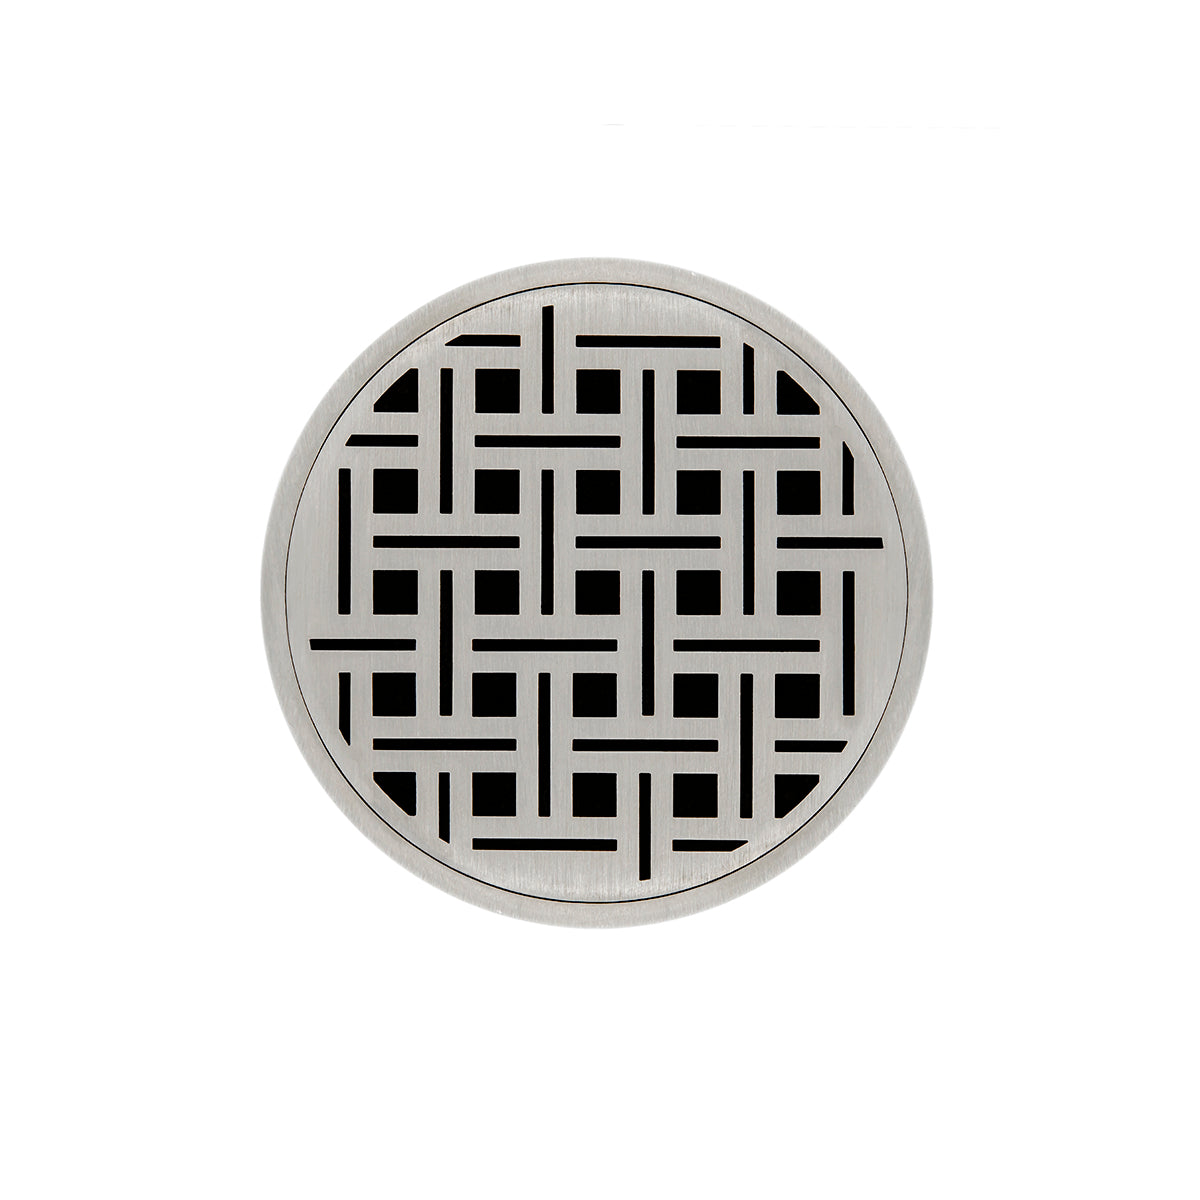 Infinity Drain 5" Round RVDB 5 Premium Center Drain Kit with Weave Pattern Decorative Plate with Stainless Steel Bonded Flange Drain Body, 2" No Hub Outlet